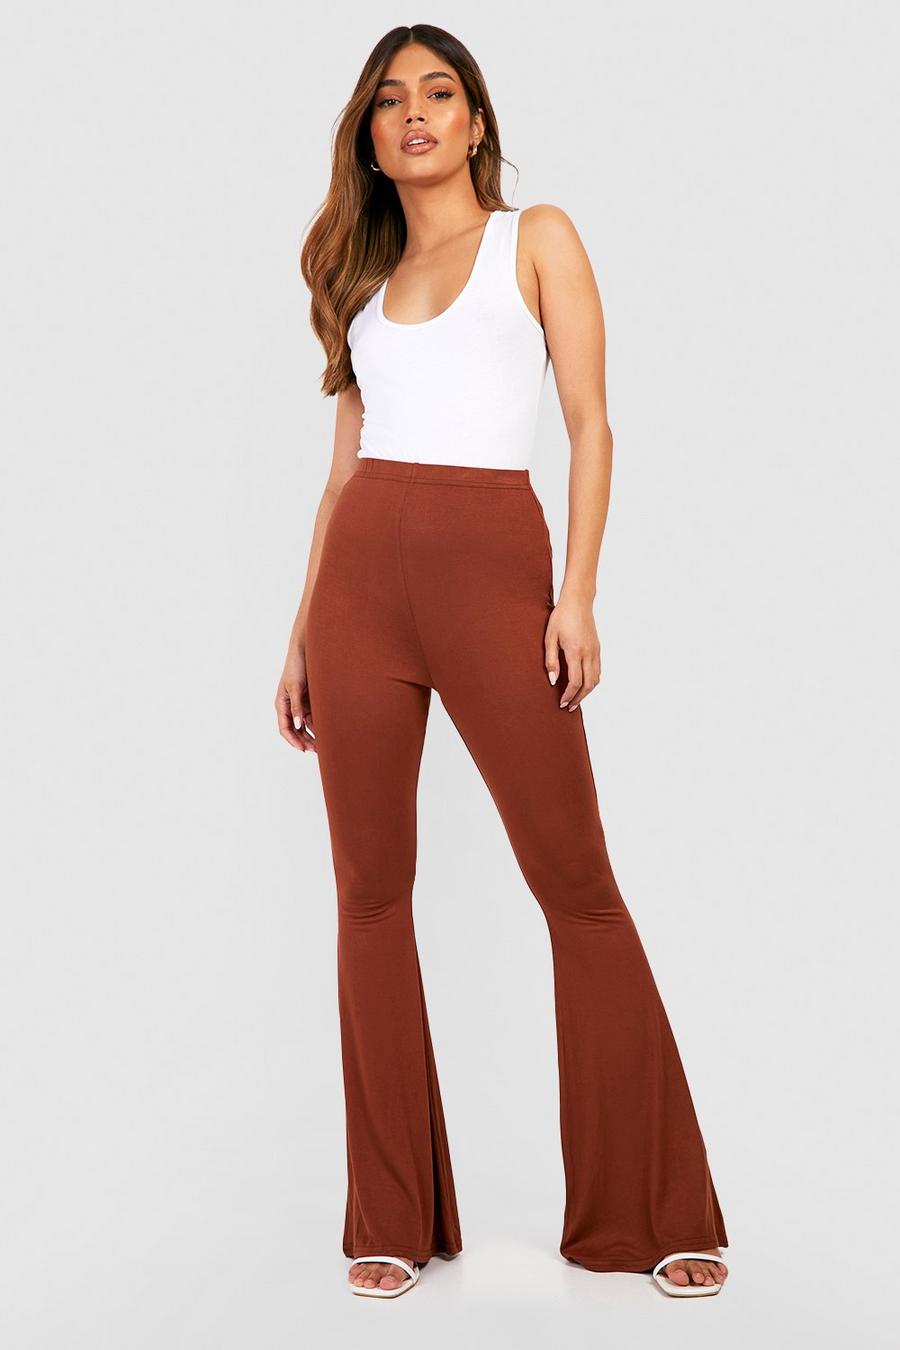 Brown High Waist Flare Trousers